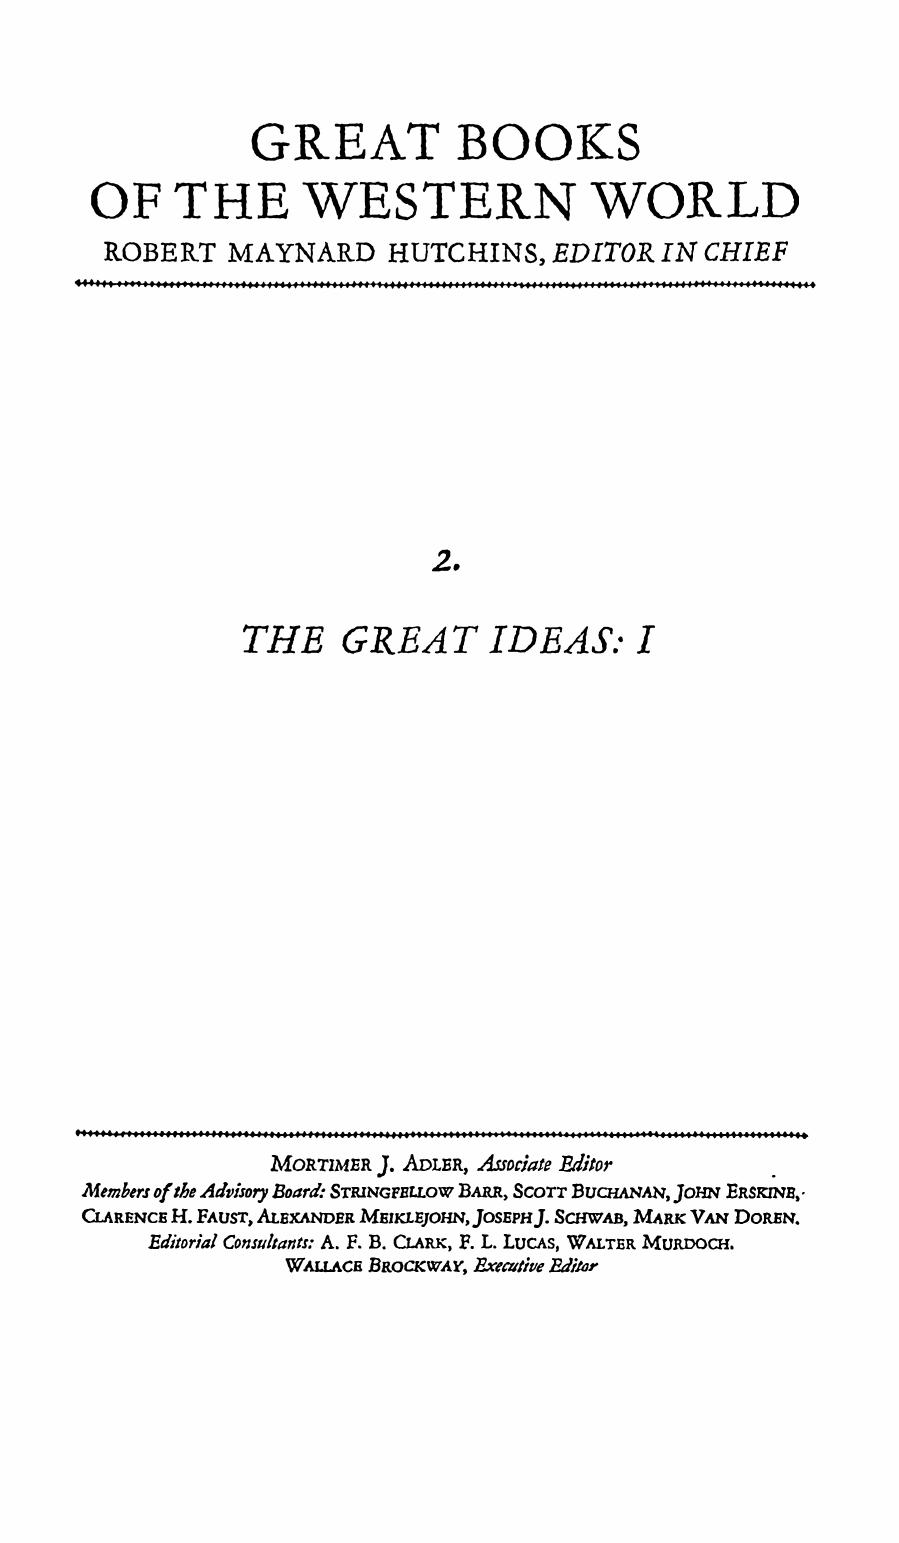 A Syntopicon An Index to The Great Ideas